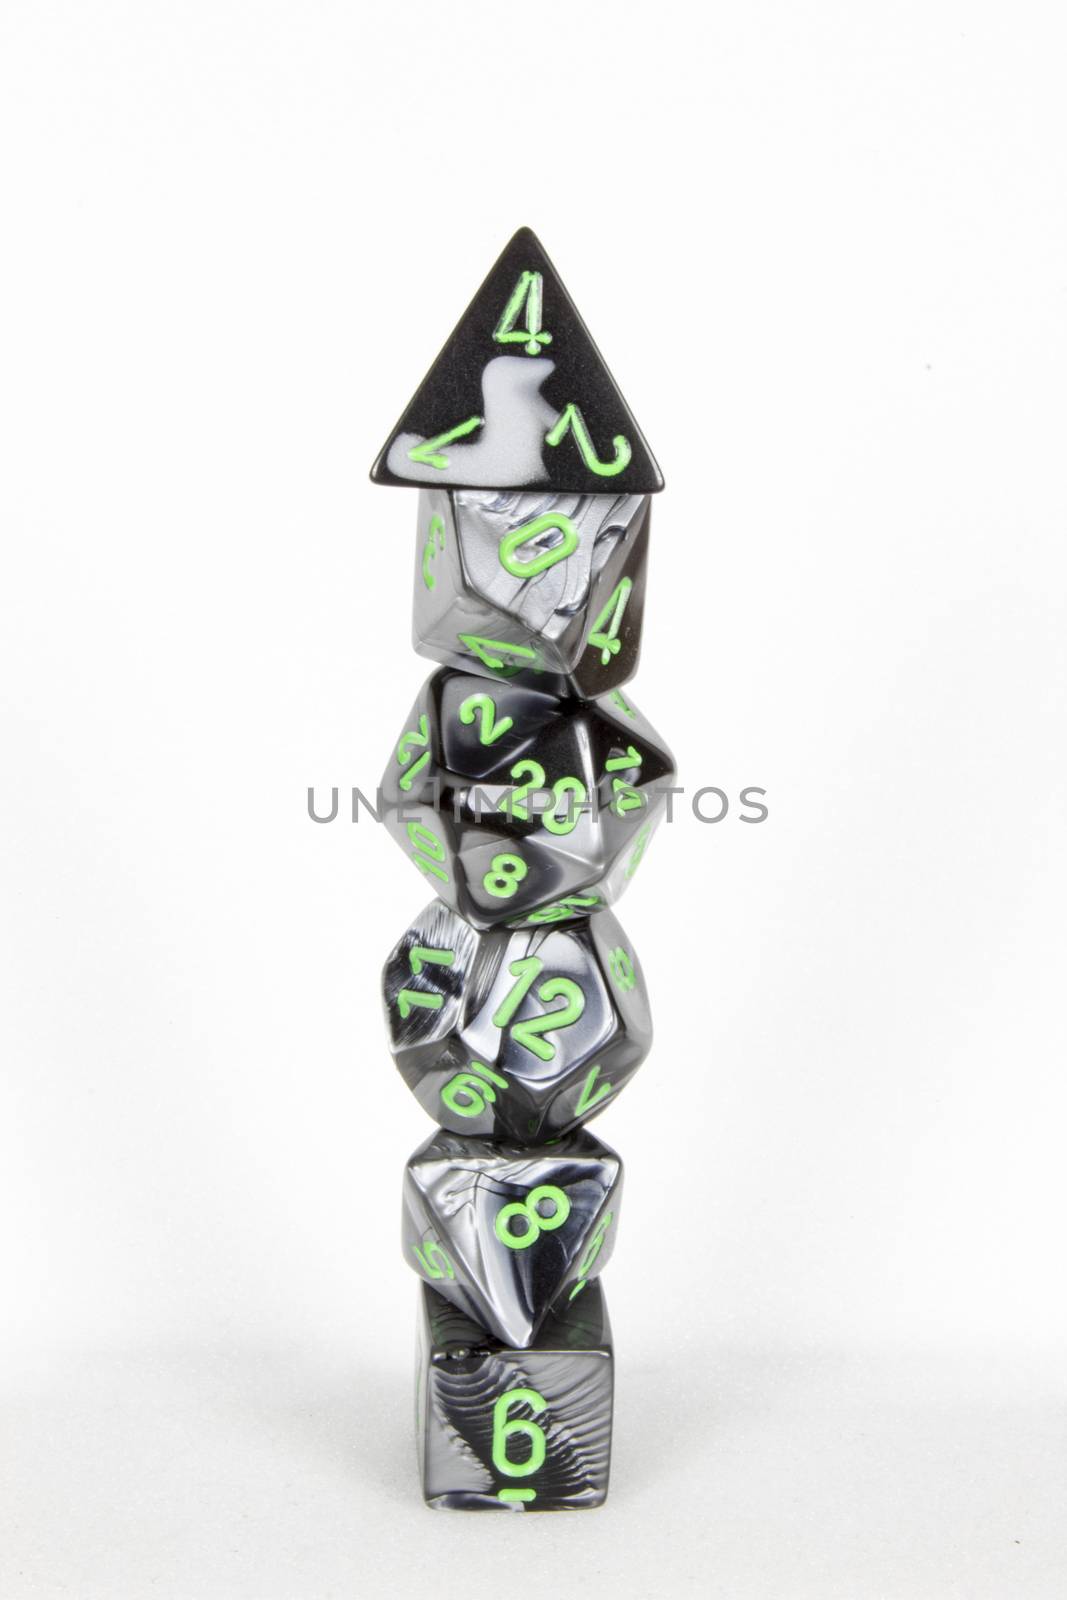 Isolated poly dice tower marble black with green numbers